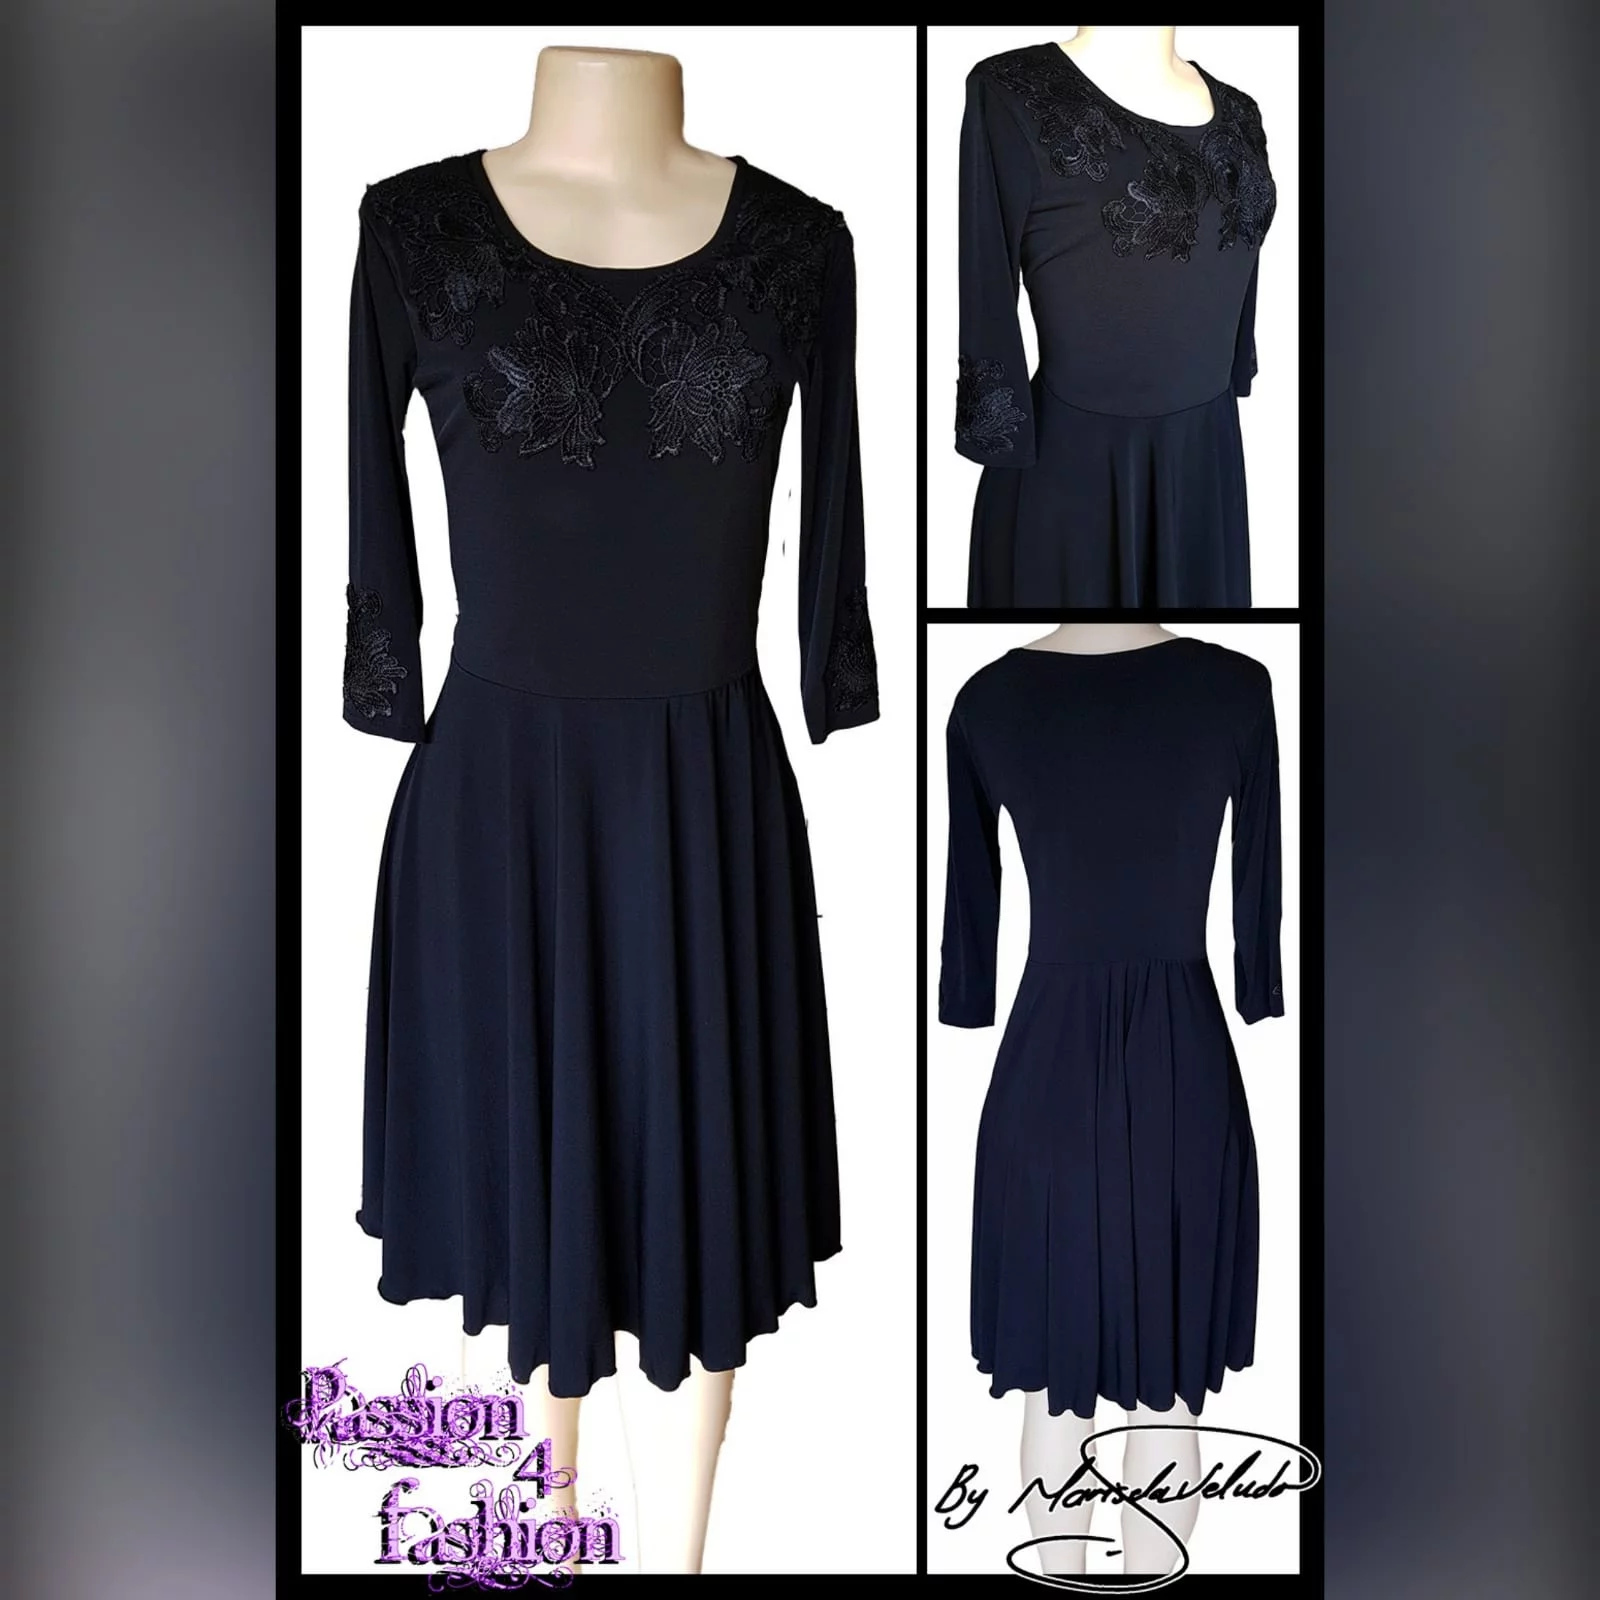 Knee length black smart casual dress 5 knee length black smart casual dress with long sleeves. Dress detailed with black lace